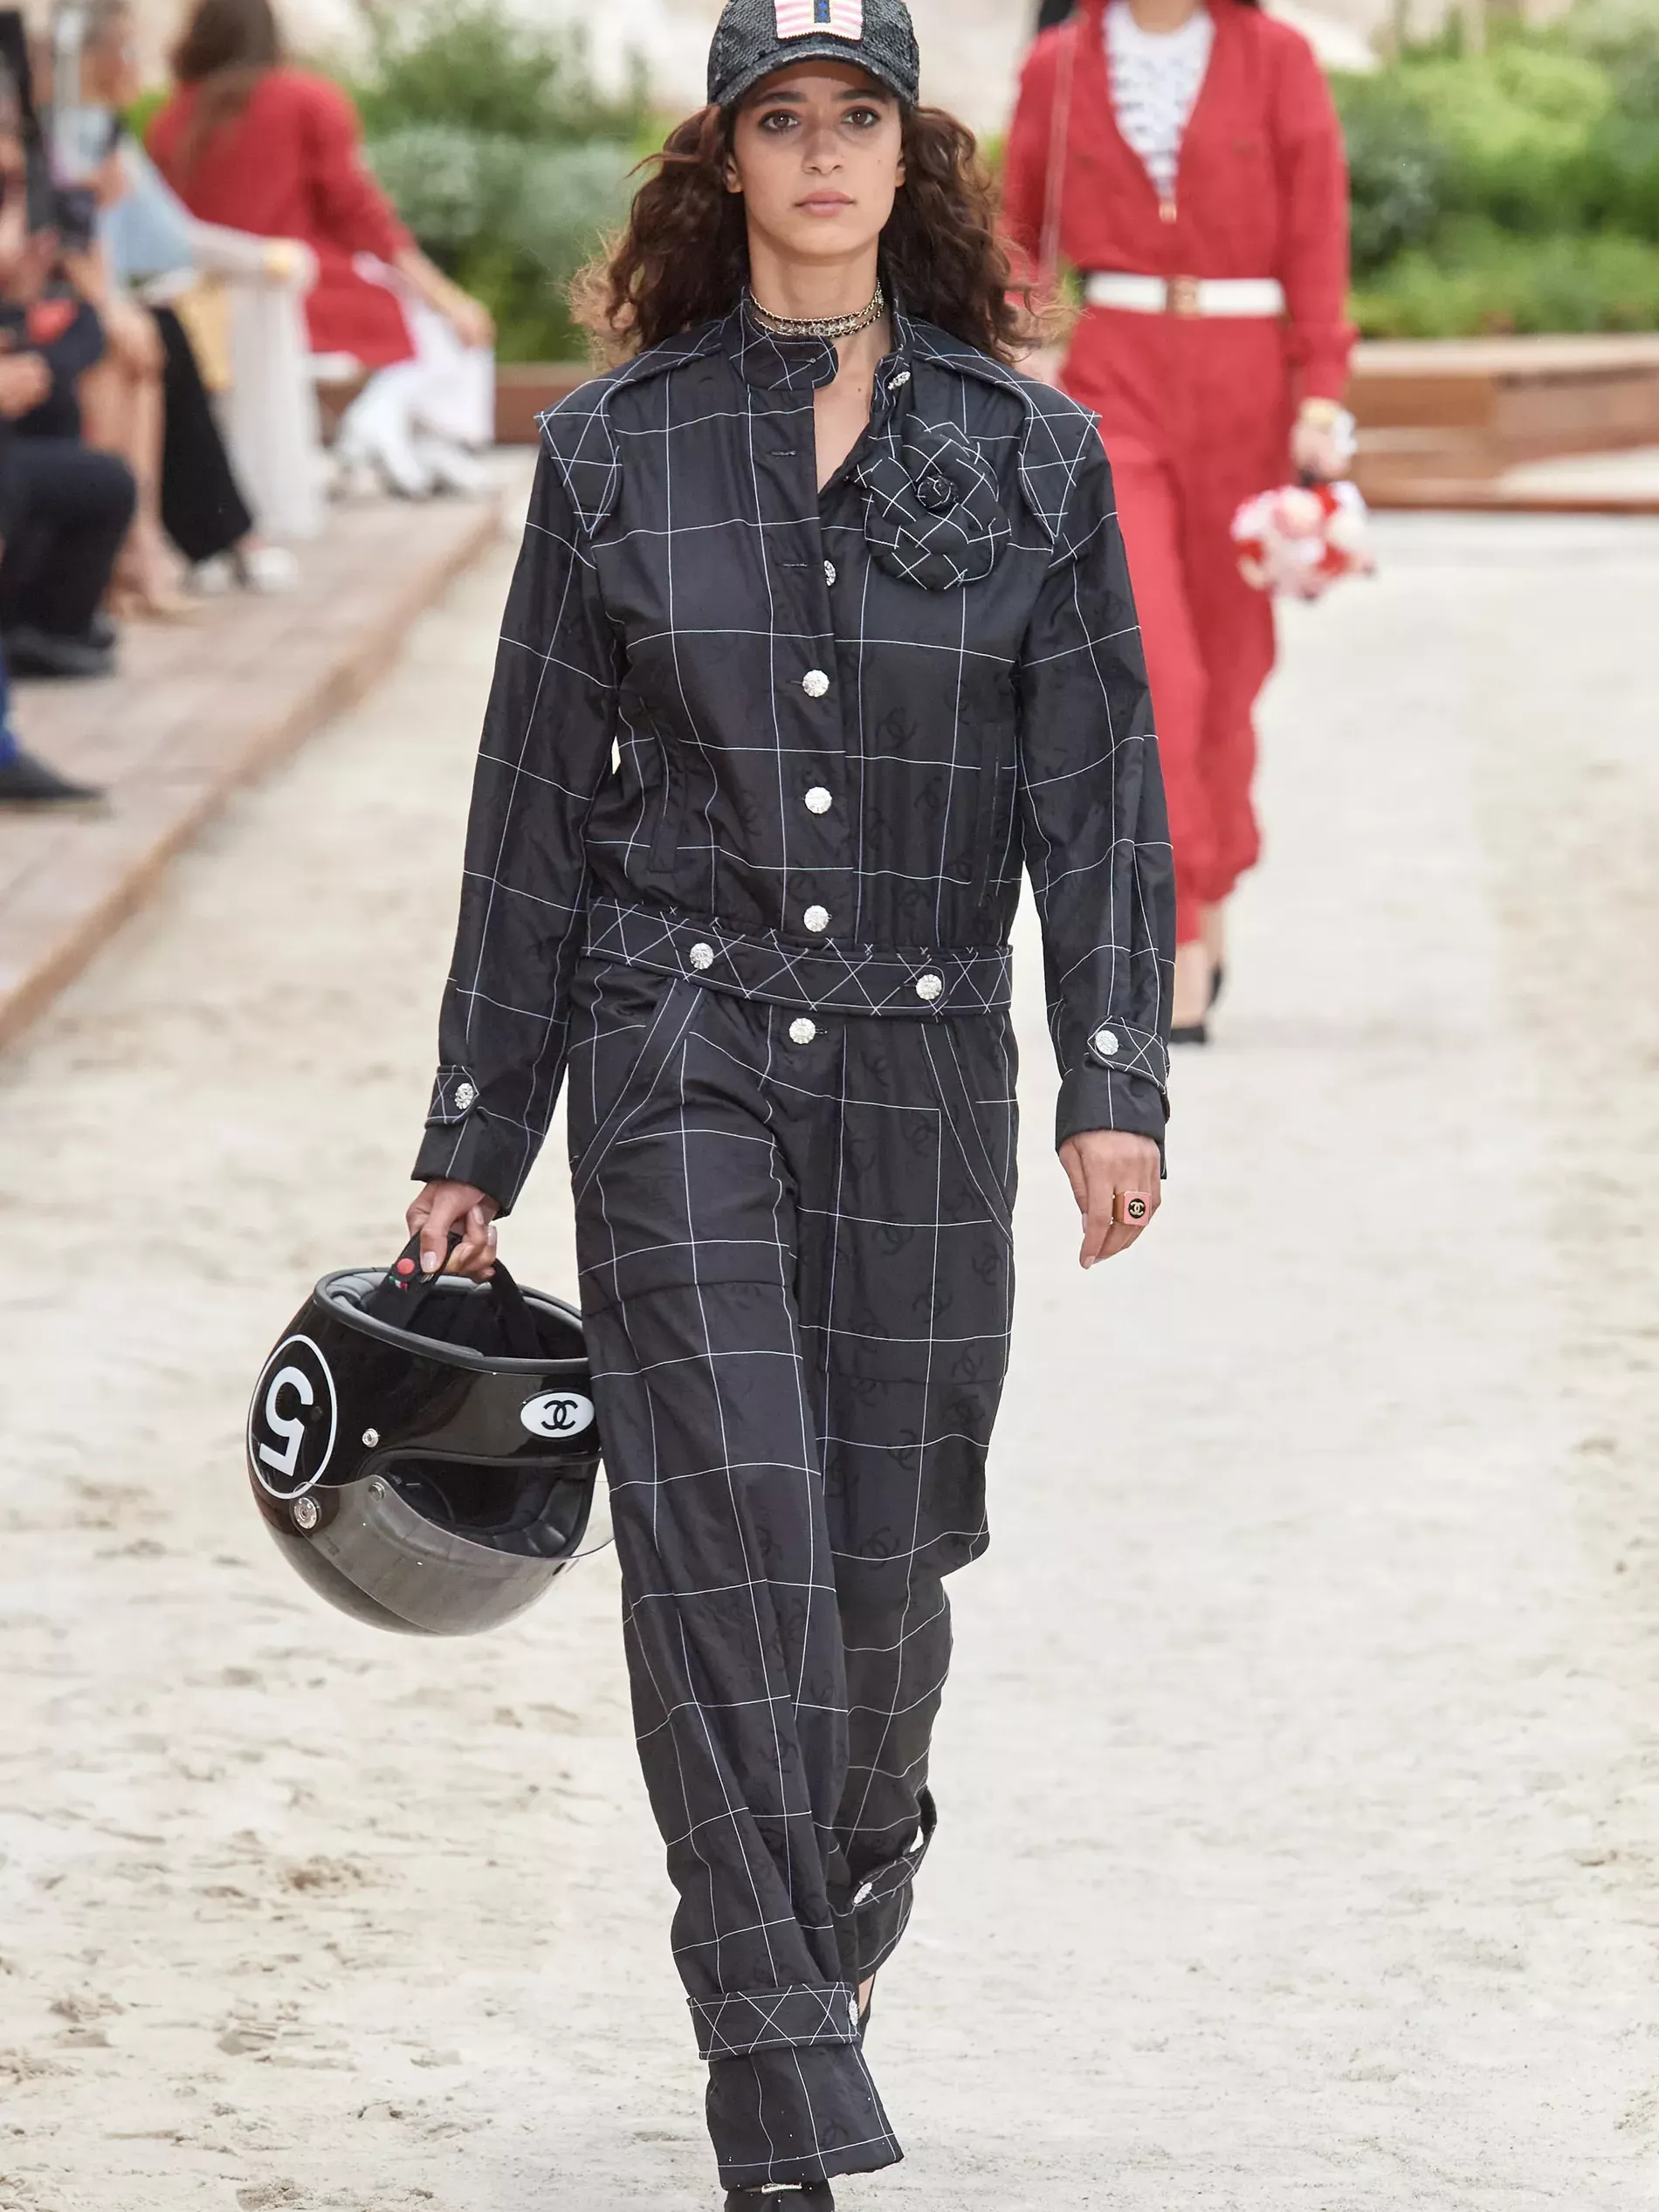 2023 Cruise Resort Collection: As soon as the tennis racket handbag debuts,  it becomes the focus of CHANEL's big show!